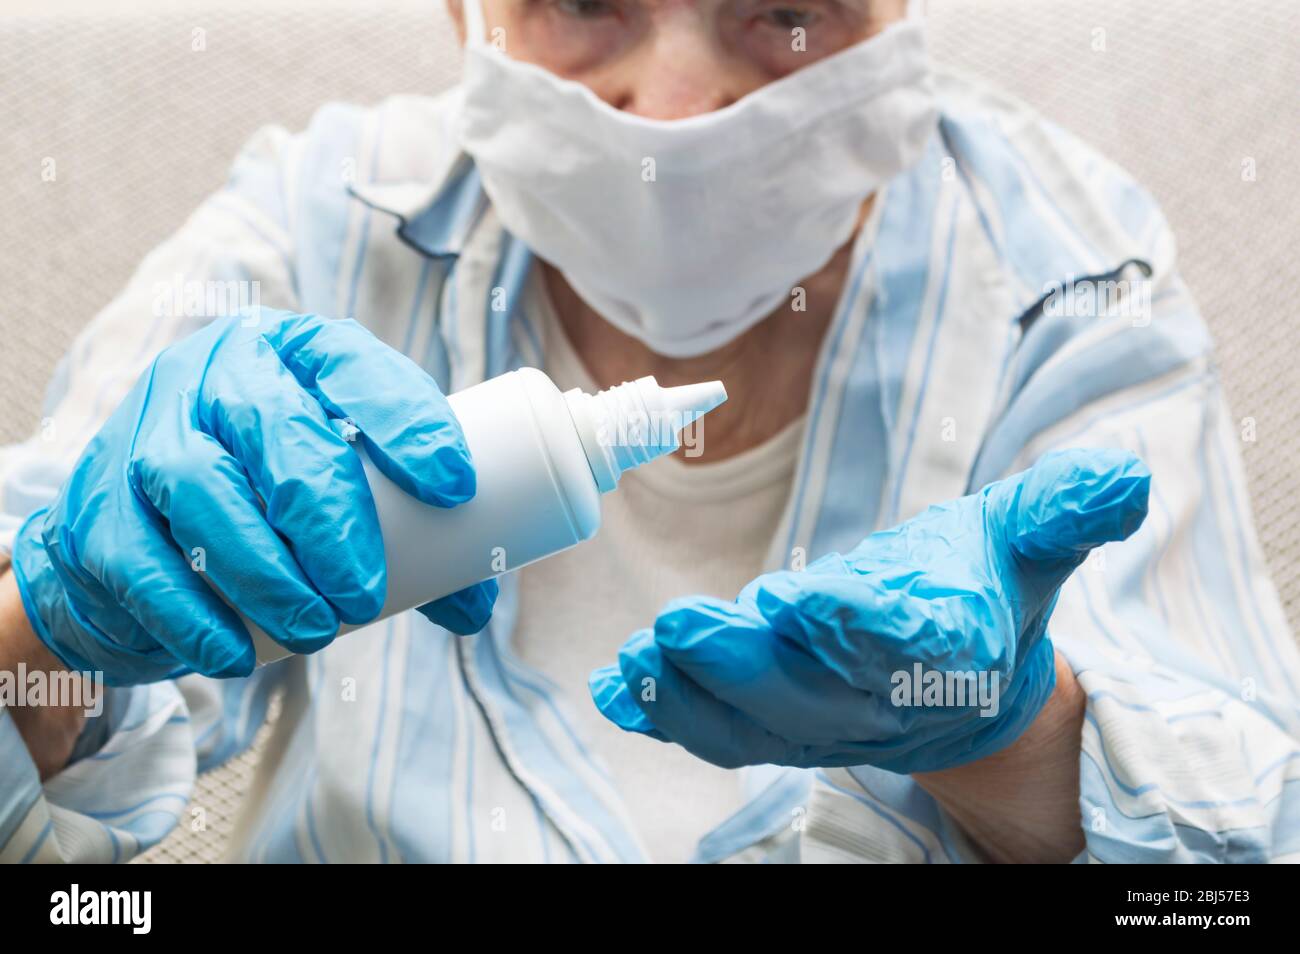 Hand disinfection and virus protection concept. Elderly woman sanitizing hands in rubber gloves squeeze alcohol from bottle Stock Photo